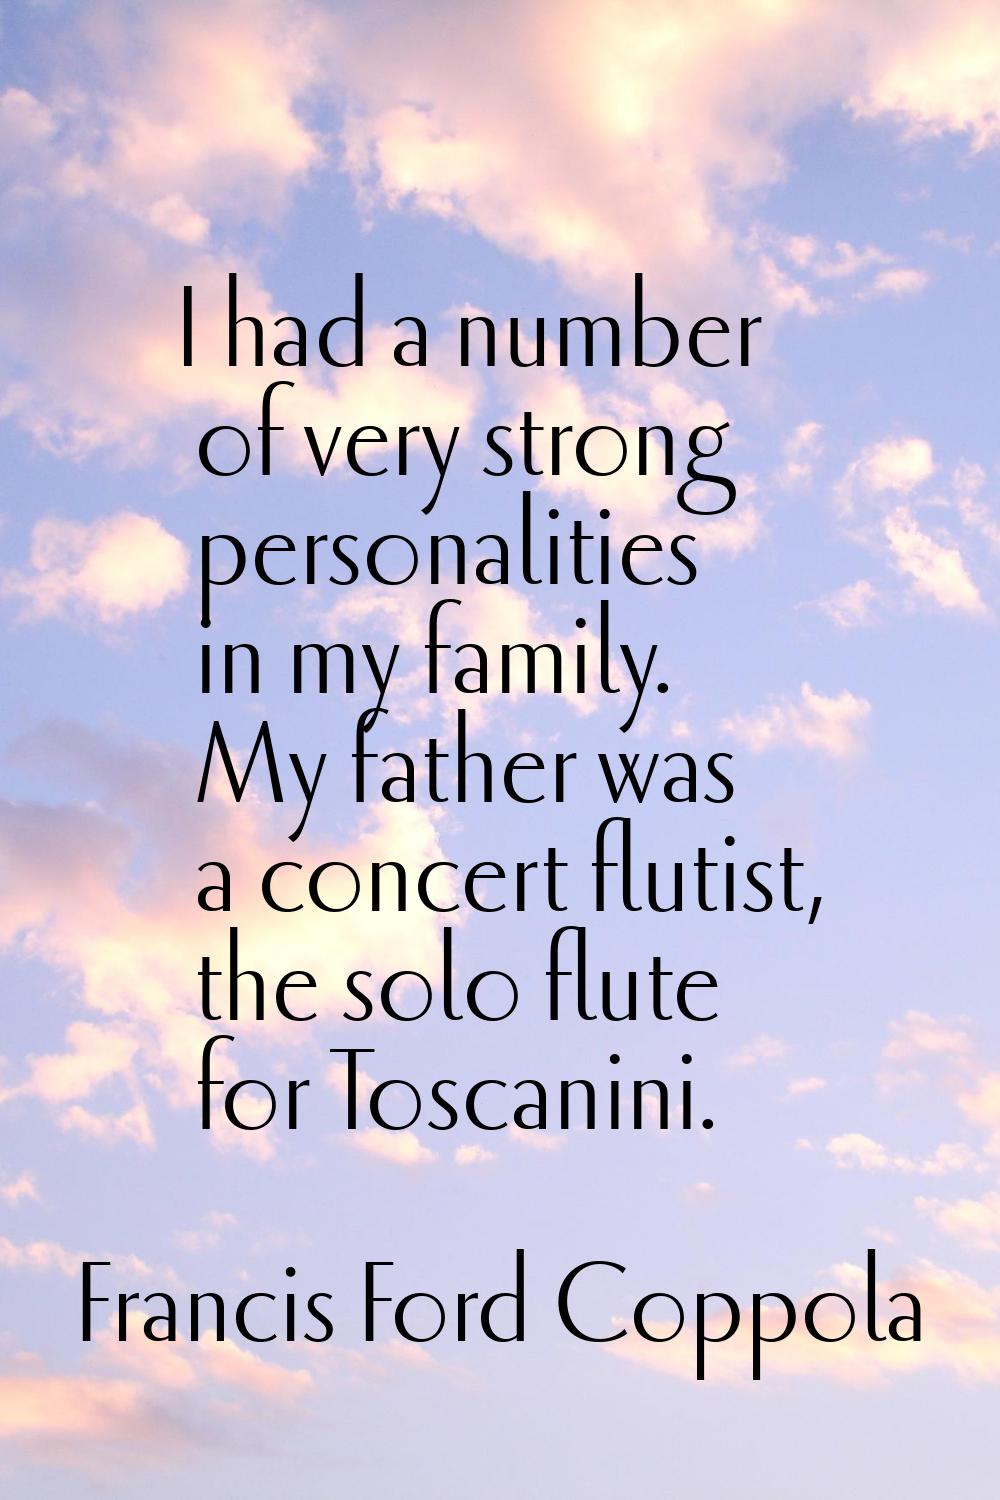 I had a number of very strong personalities in my family. My father was a concert flutist, the solo